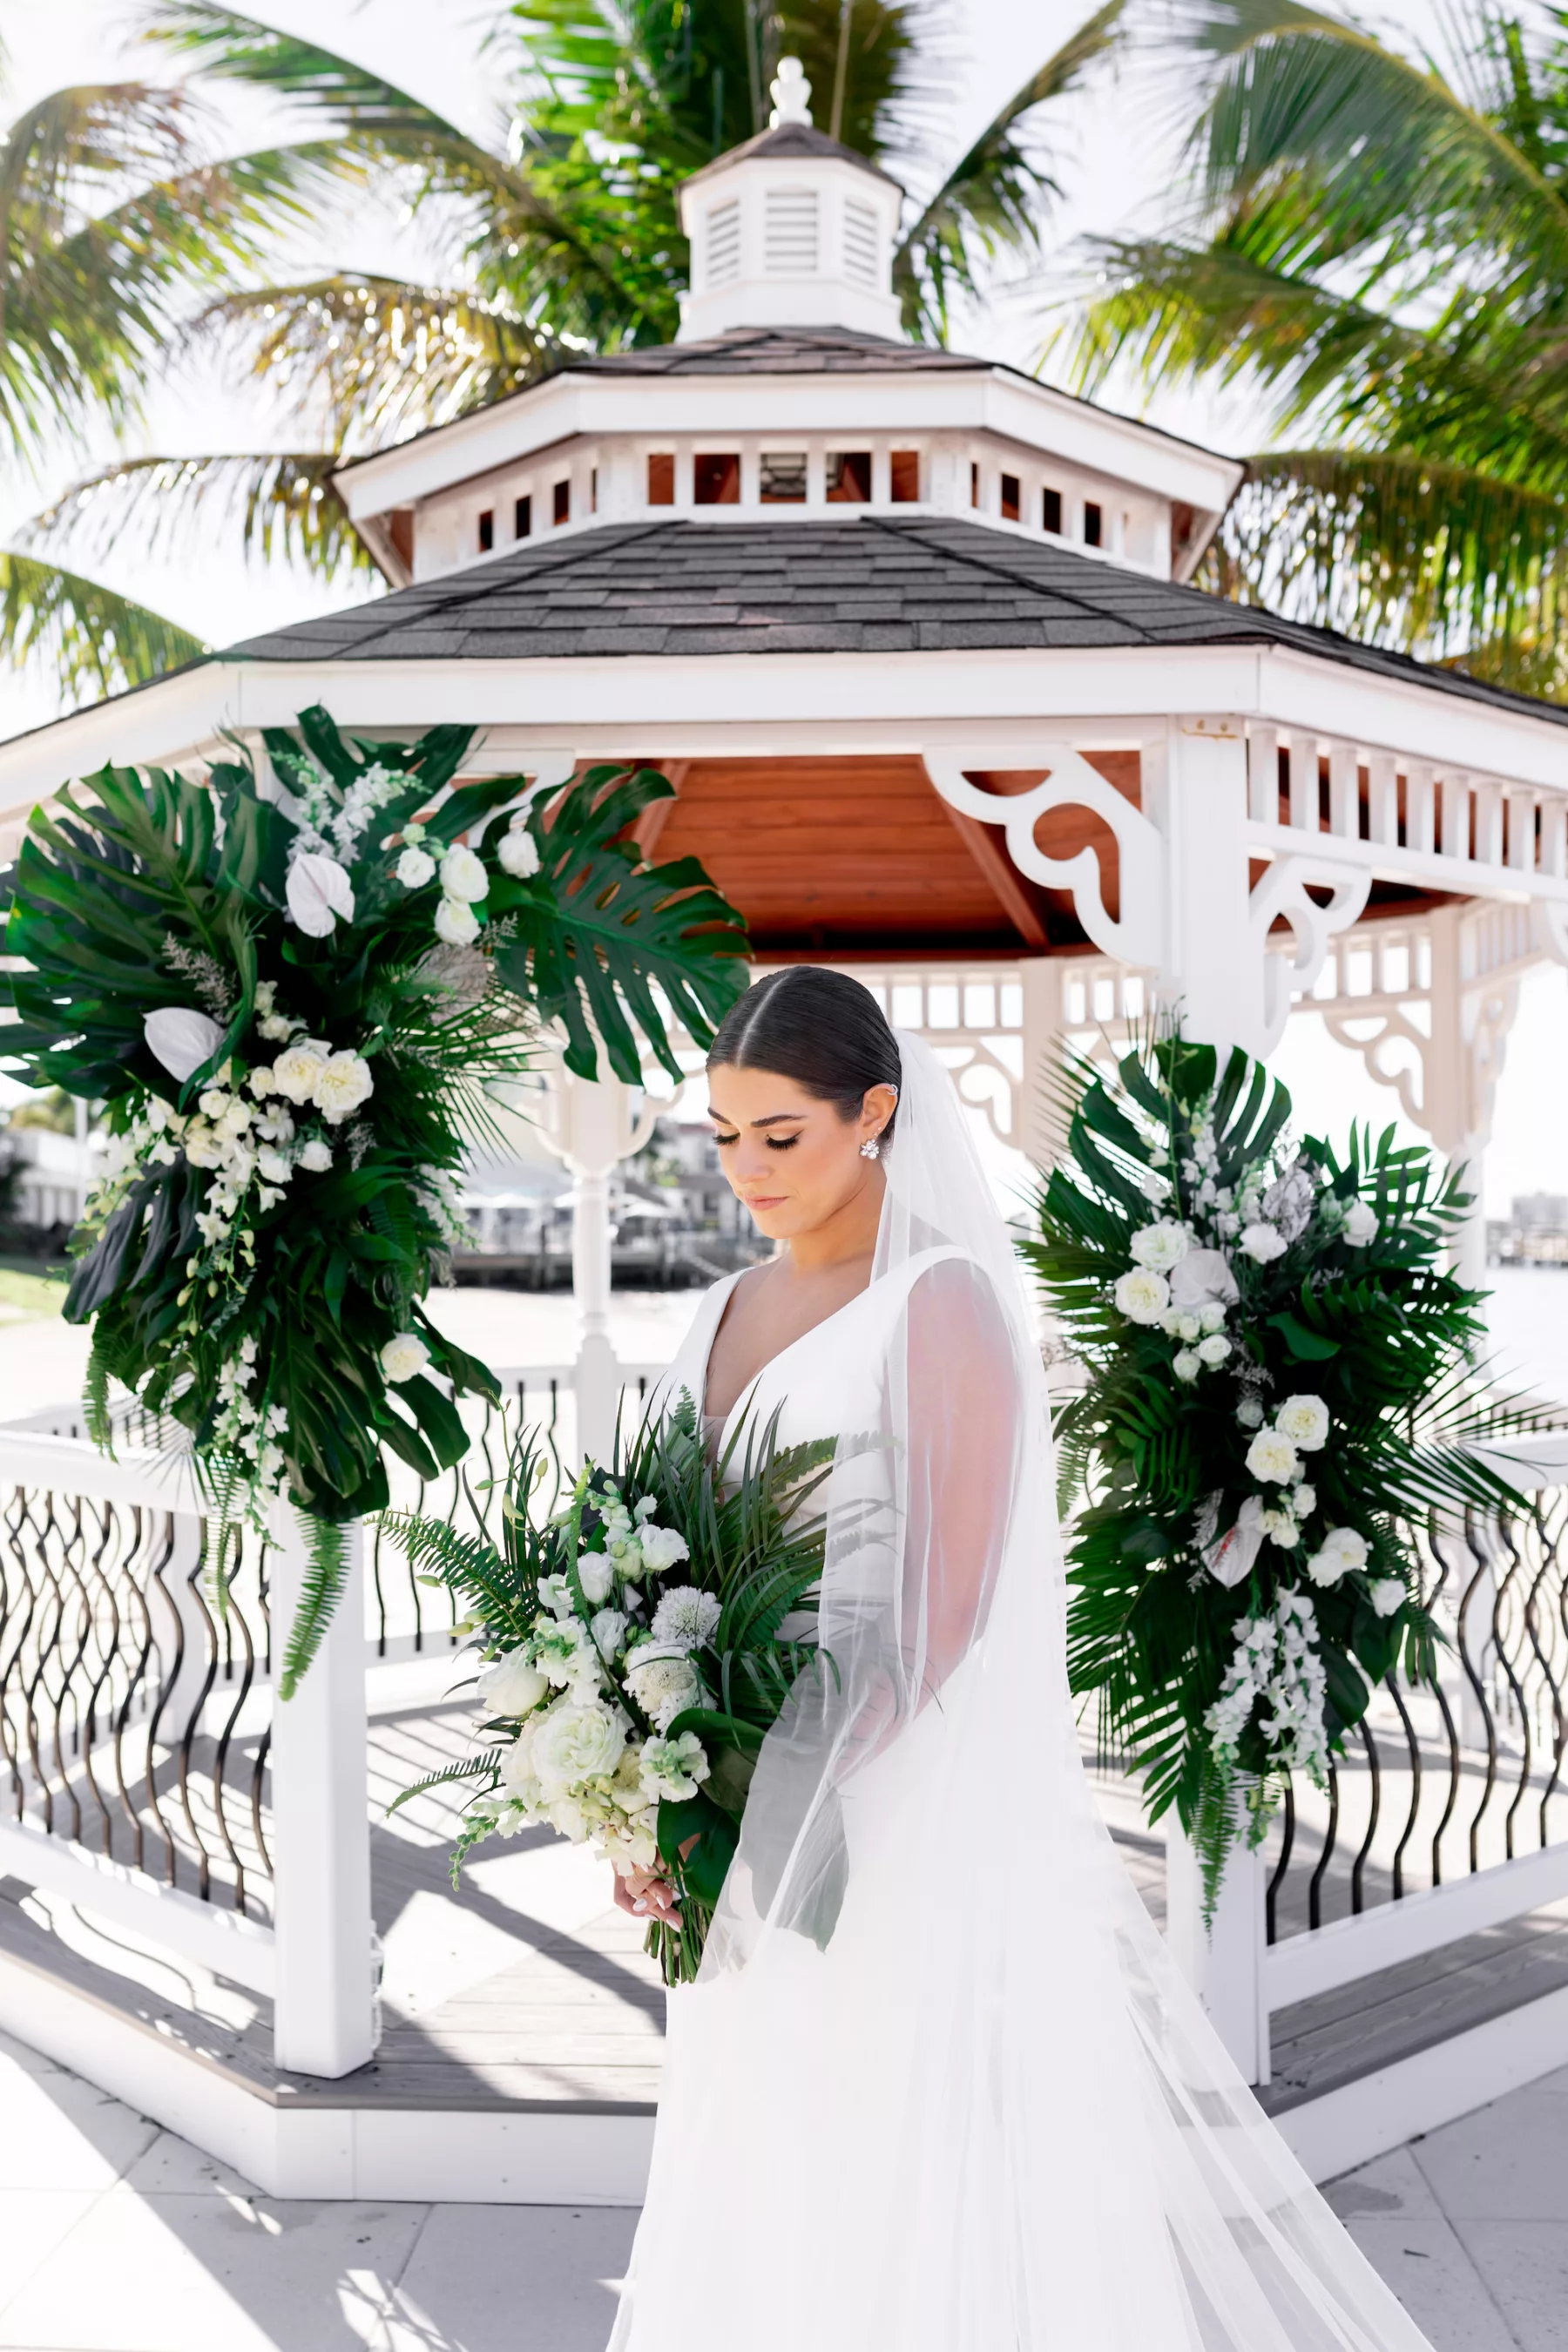 Tropical Wedding Ceremony Inspiration | Elegant Updo Hair and Makeup Ideas | Tampa Bay Hair and Makeup Artist Femme Akoi Beauty Studio | Venue Isla Del Sol Yacht & Country Club